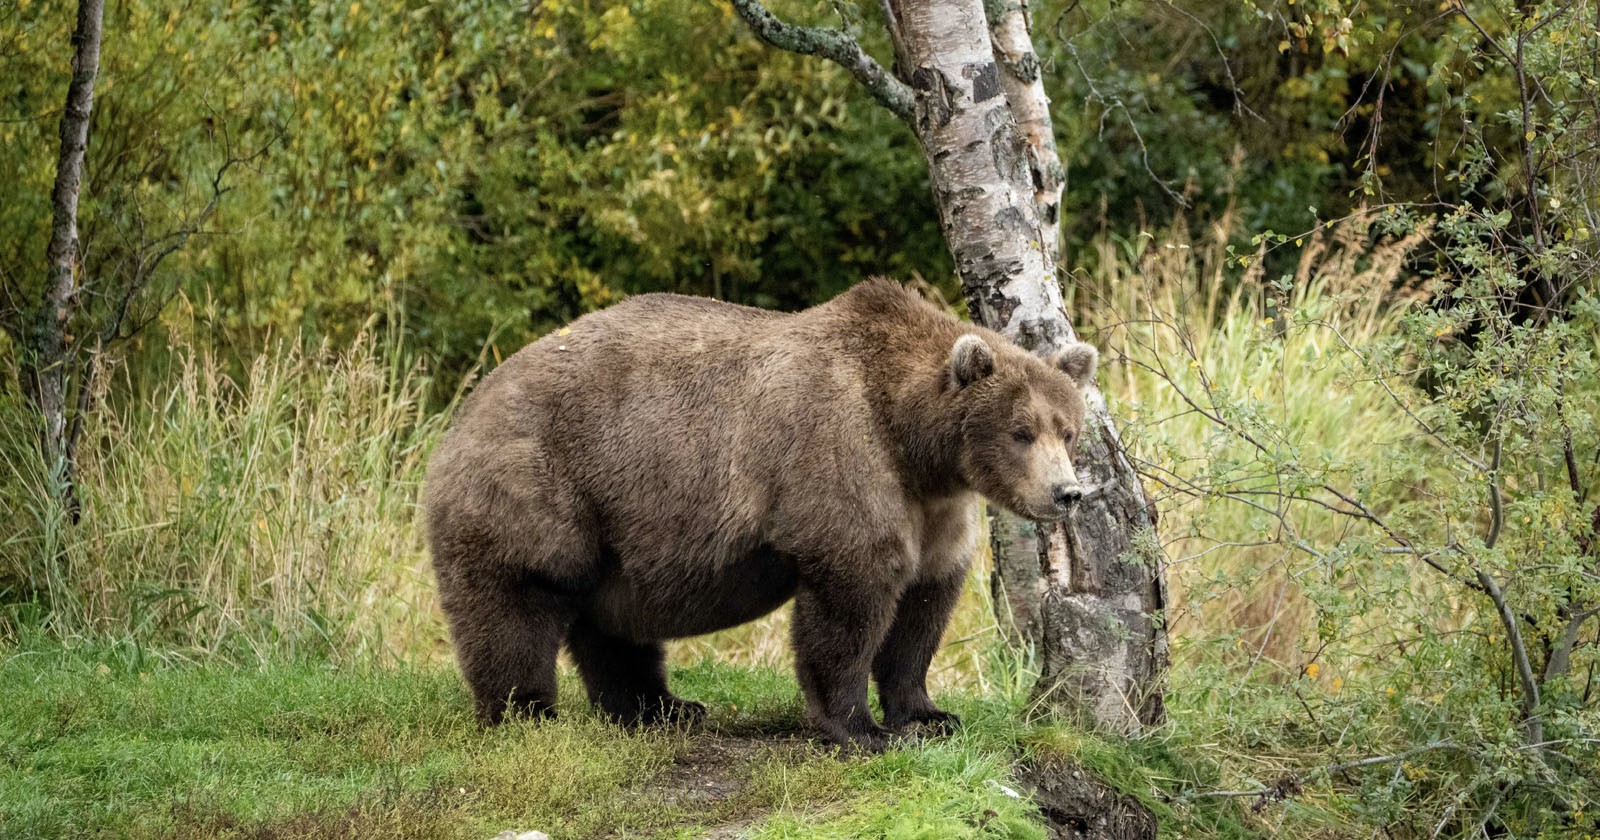 Fat Bear Week Celebrates Brown Bears with Photos of Their Growing Girth